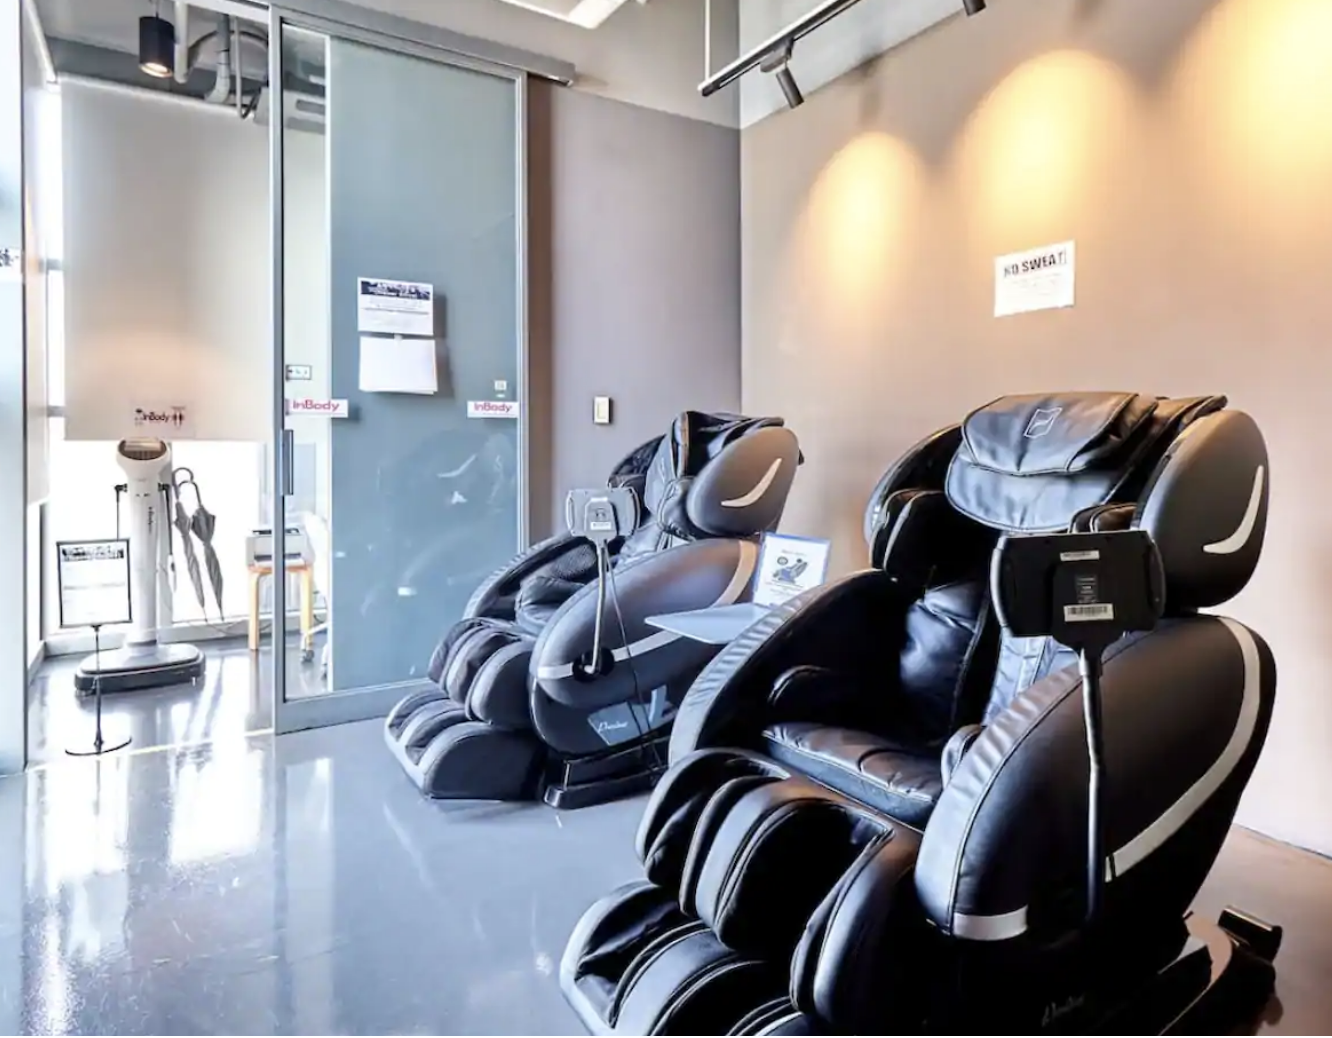 Facilities: Massage Chairs (Copy)